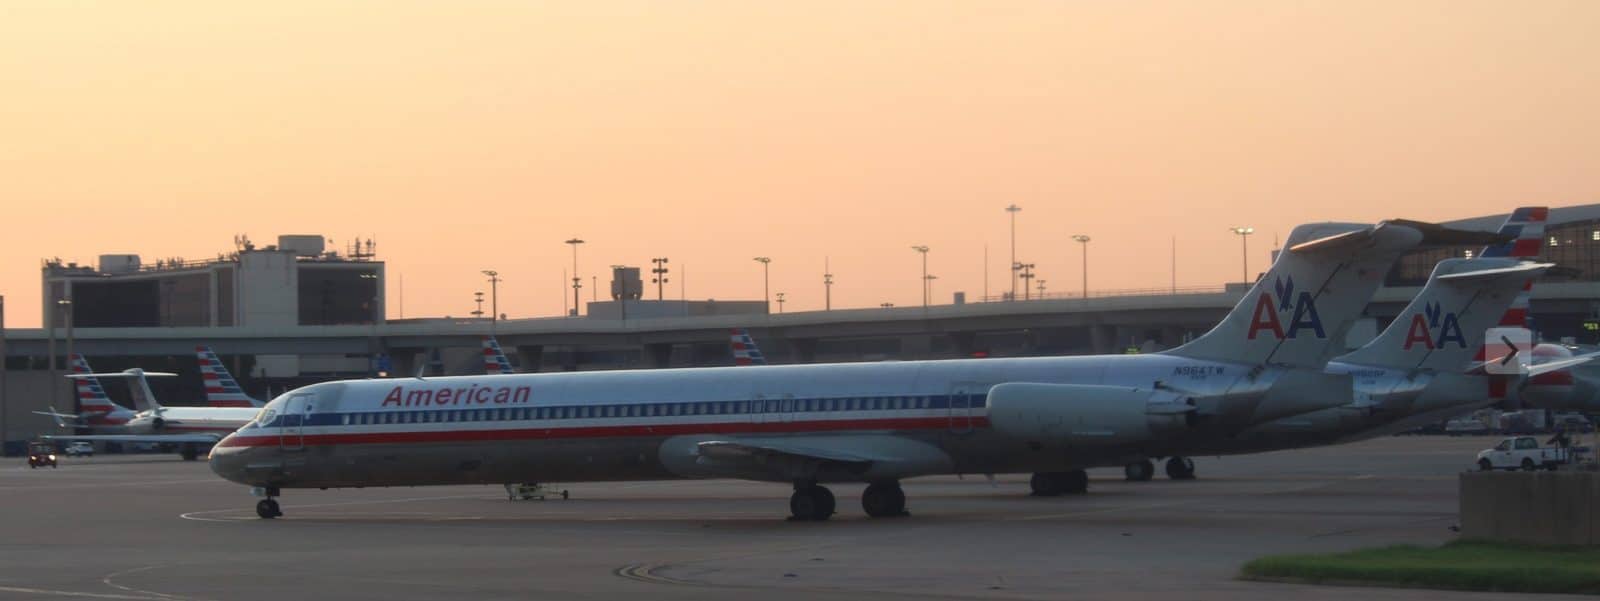 MD-80 on the tarmac.